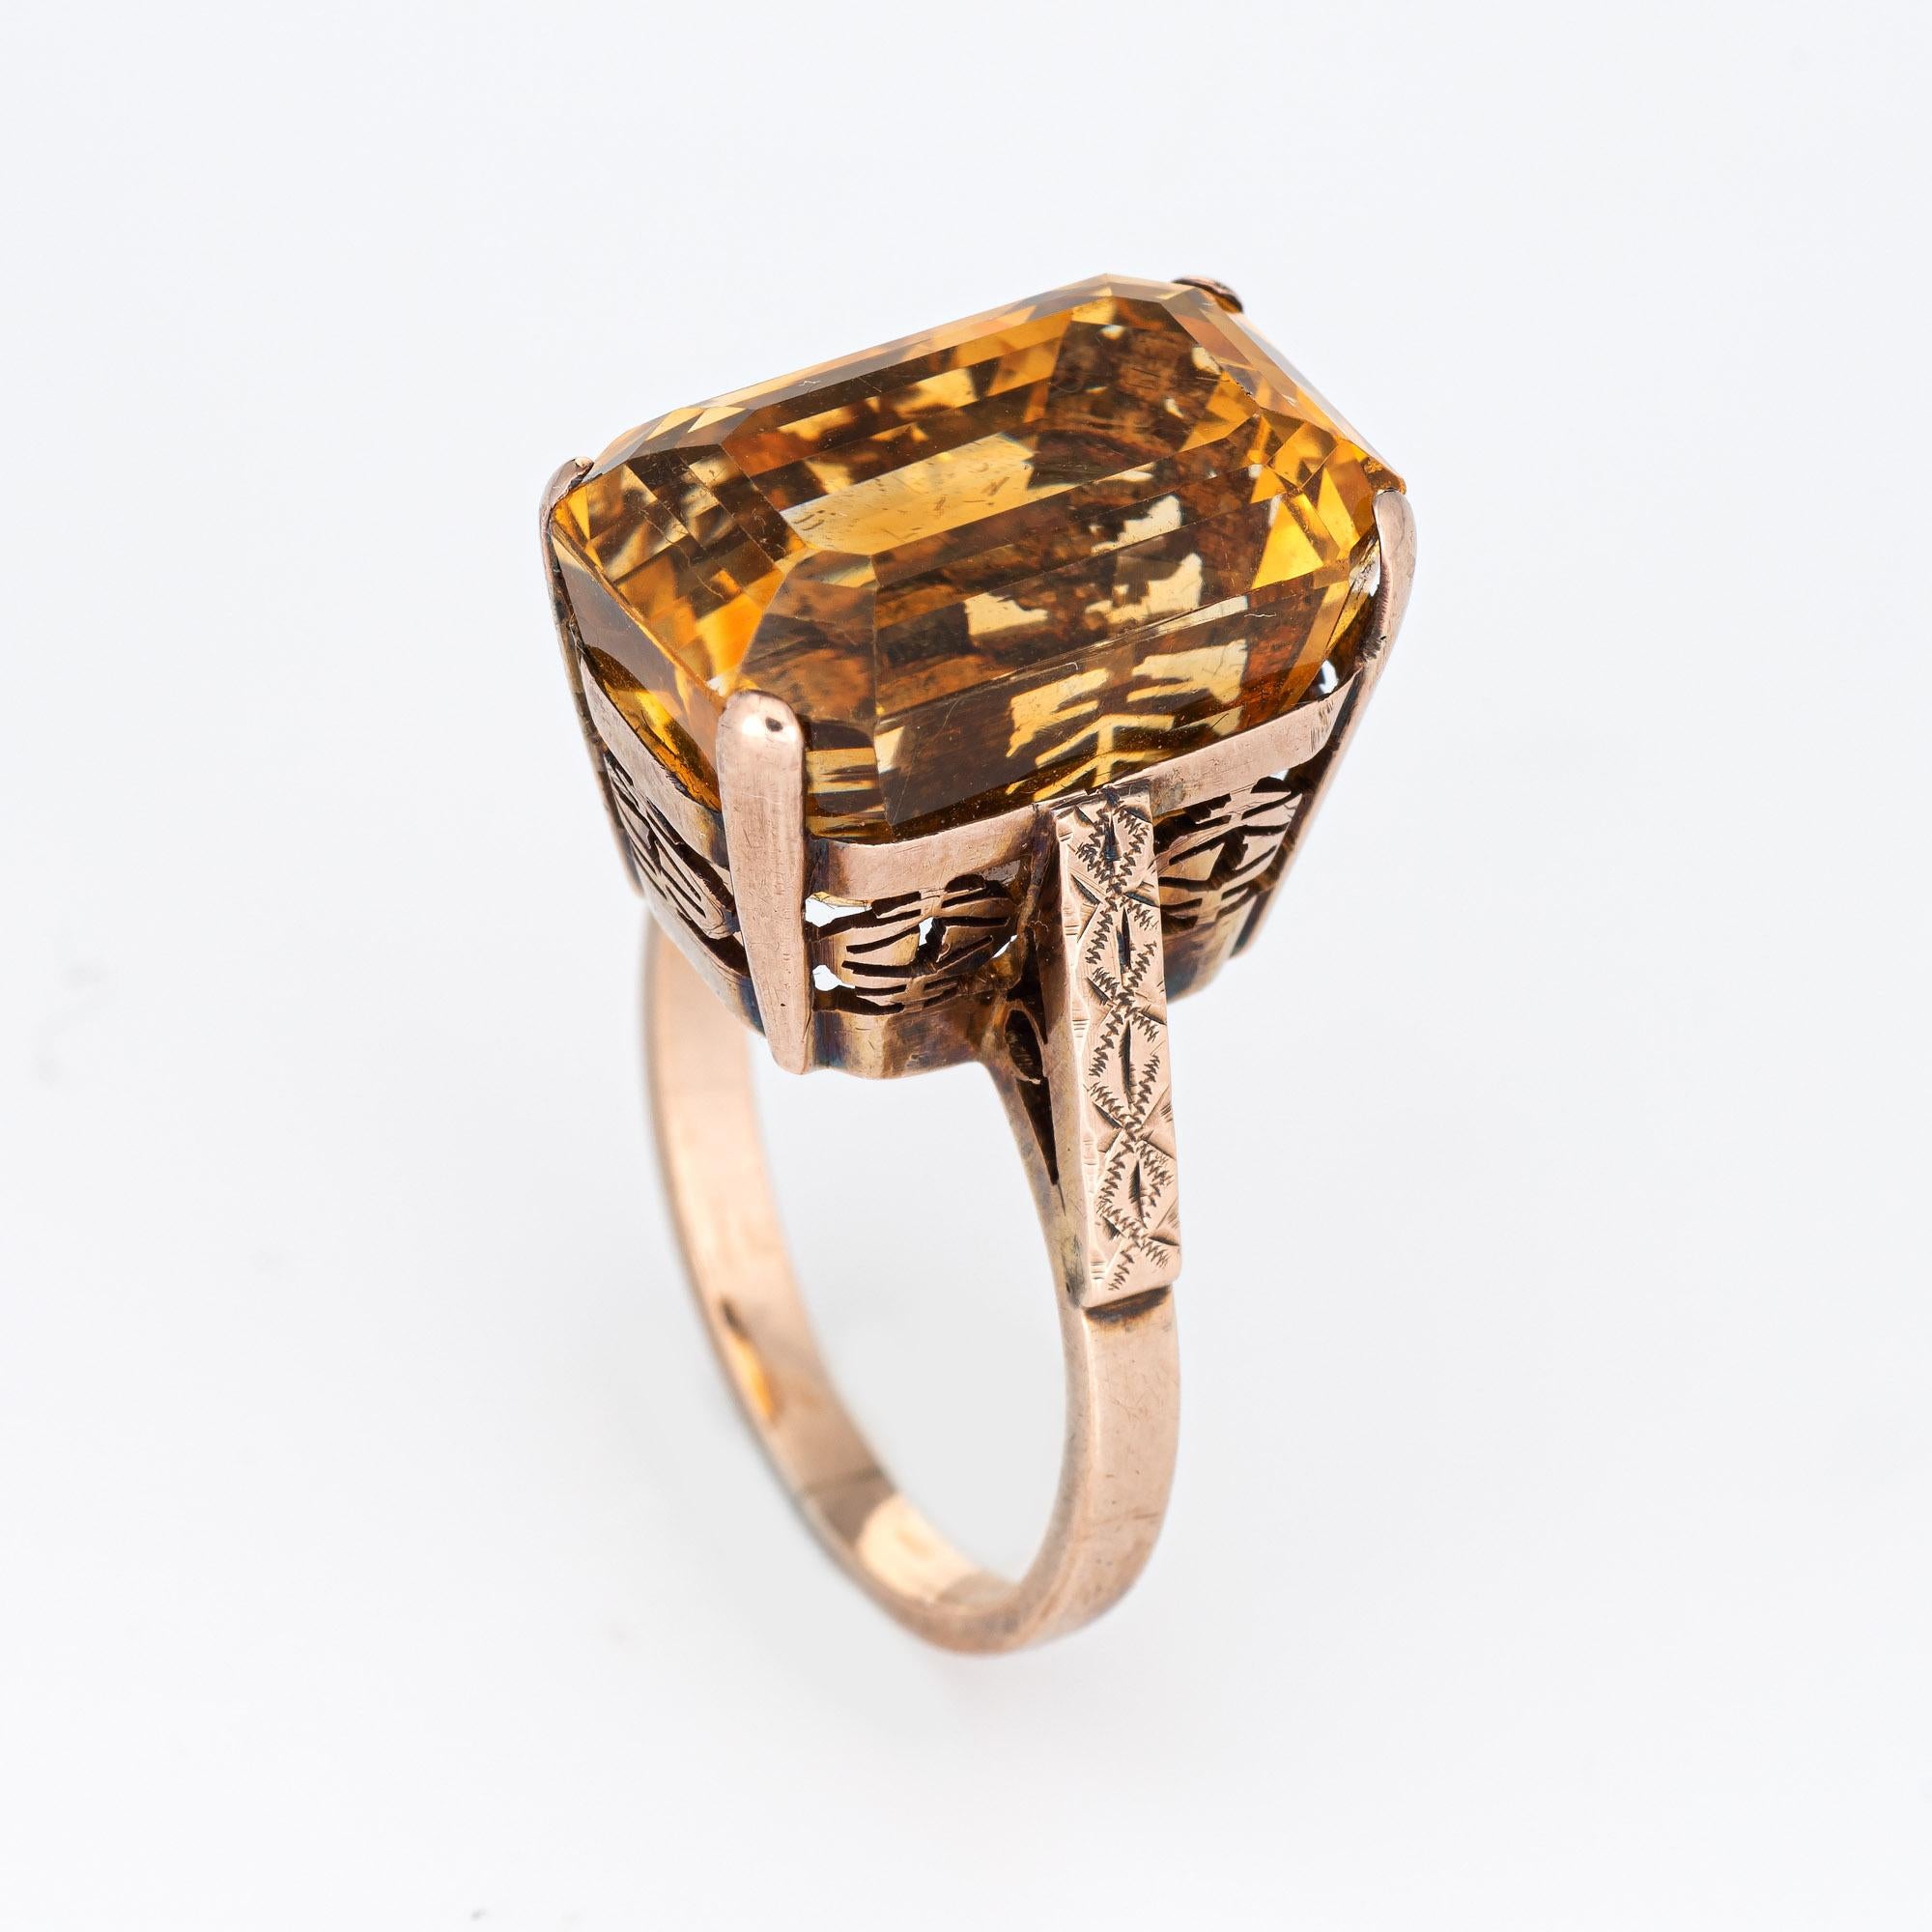 Stylish vintage golden citrine cocktail ring (circa 1950s to 1960s) crafted in 9 karat rose gold. 

Step cut rectangular citrine measures 16mm x 10.5mm x 12.5mm (estimated at 12.25 carats). The citrine is in very good condition and free of cracks or